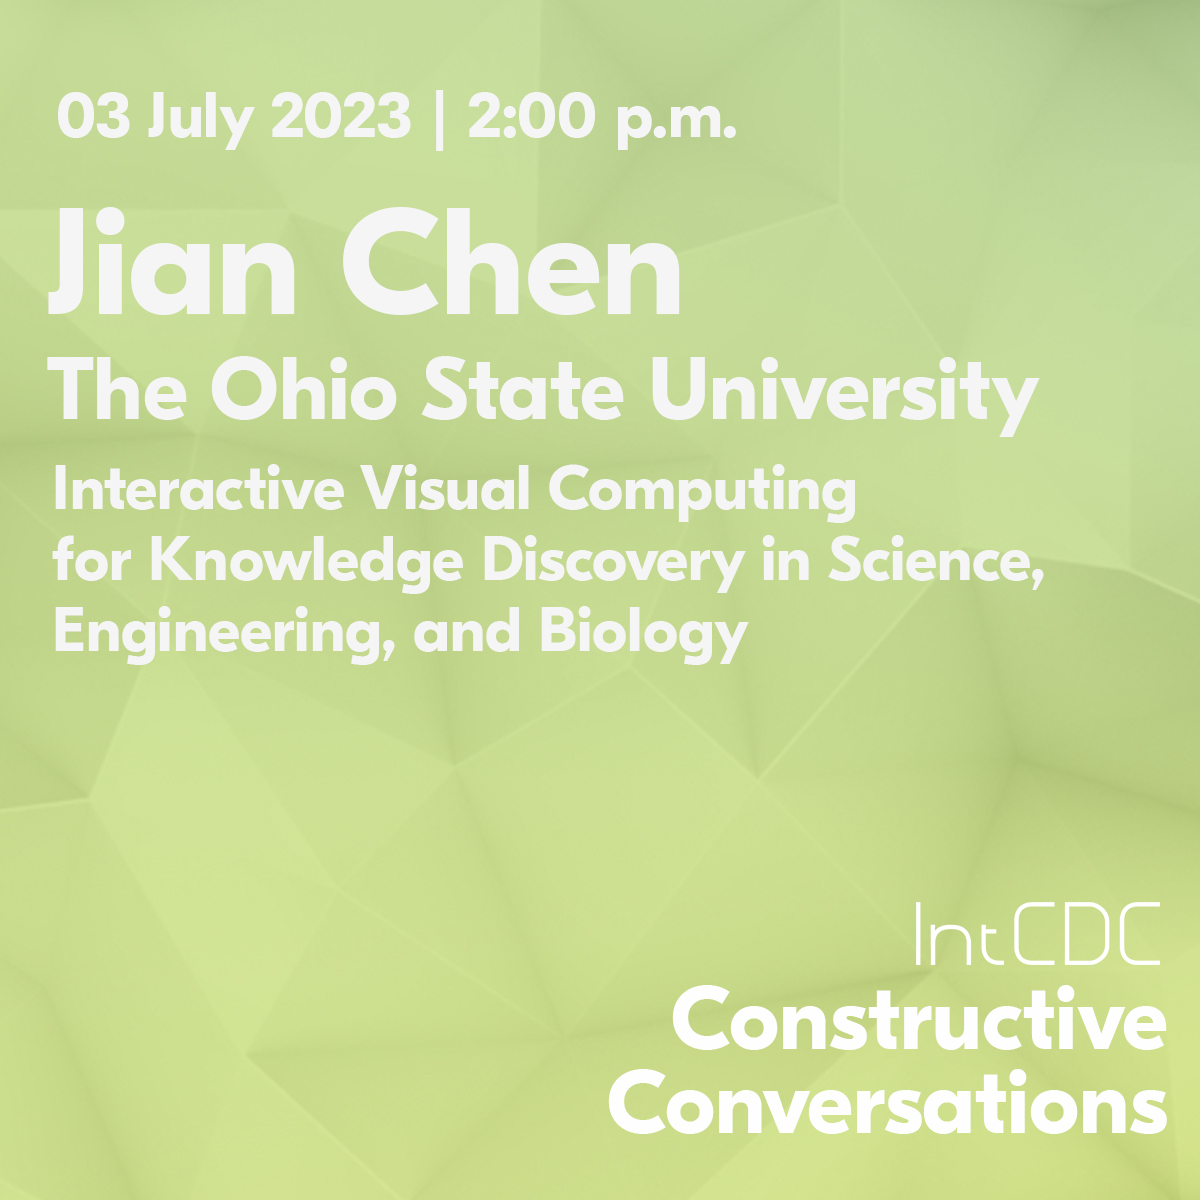 Join us for today's Constructive Conversations with Jian Chen, tenured Associate Professor @OhioState 💡 Interactive Visual Computing for Knowledge Discovery in Science, Engineering, and Biology ⏰ July 3, 2023 | 2:00-3:30 pm CET 🔗 in bio or tinyurl.com/39pc8rn7